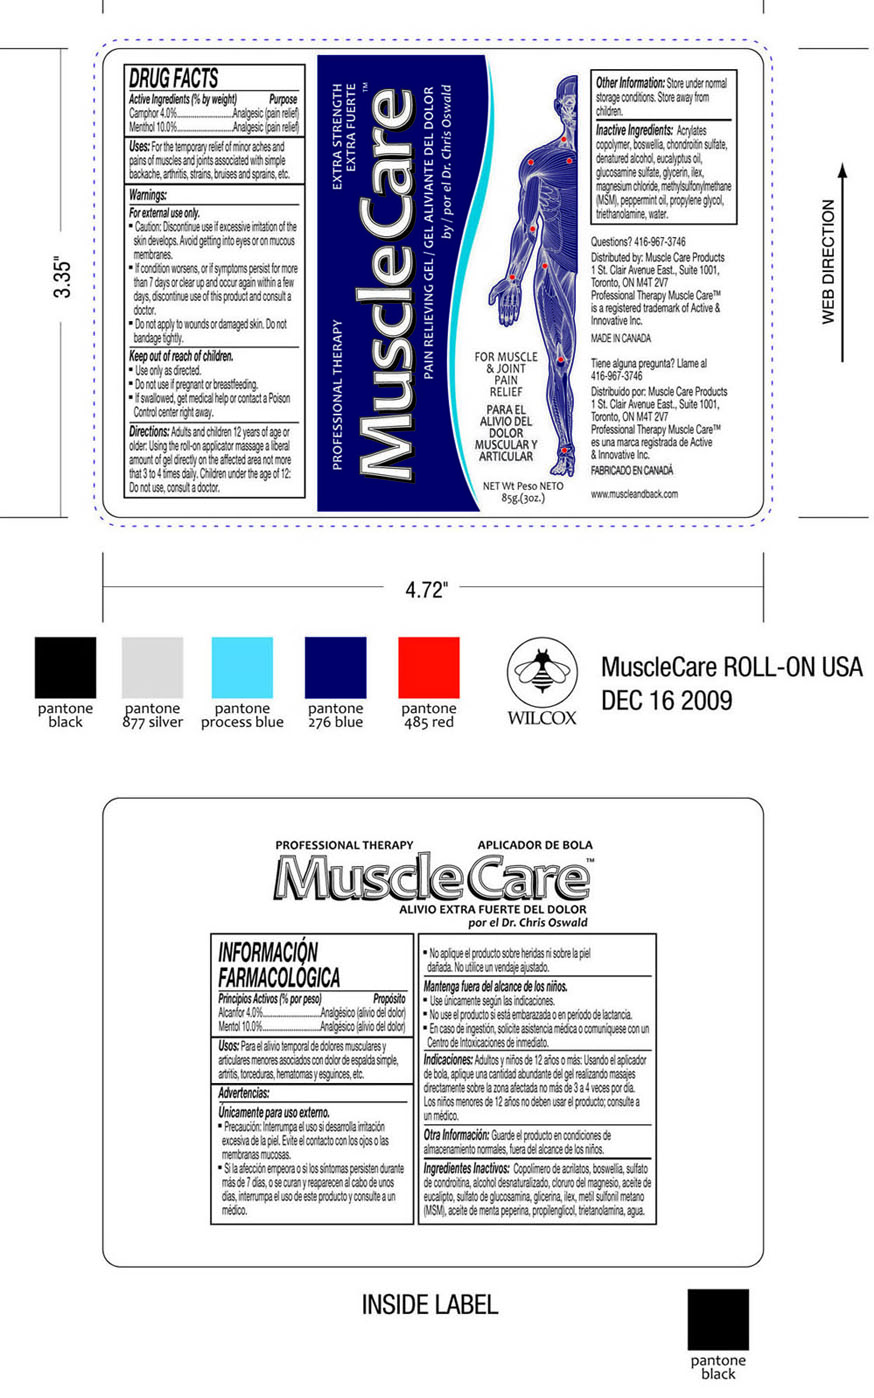 Musclecare Pain relieving gel